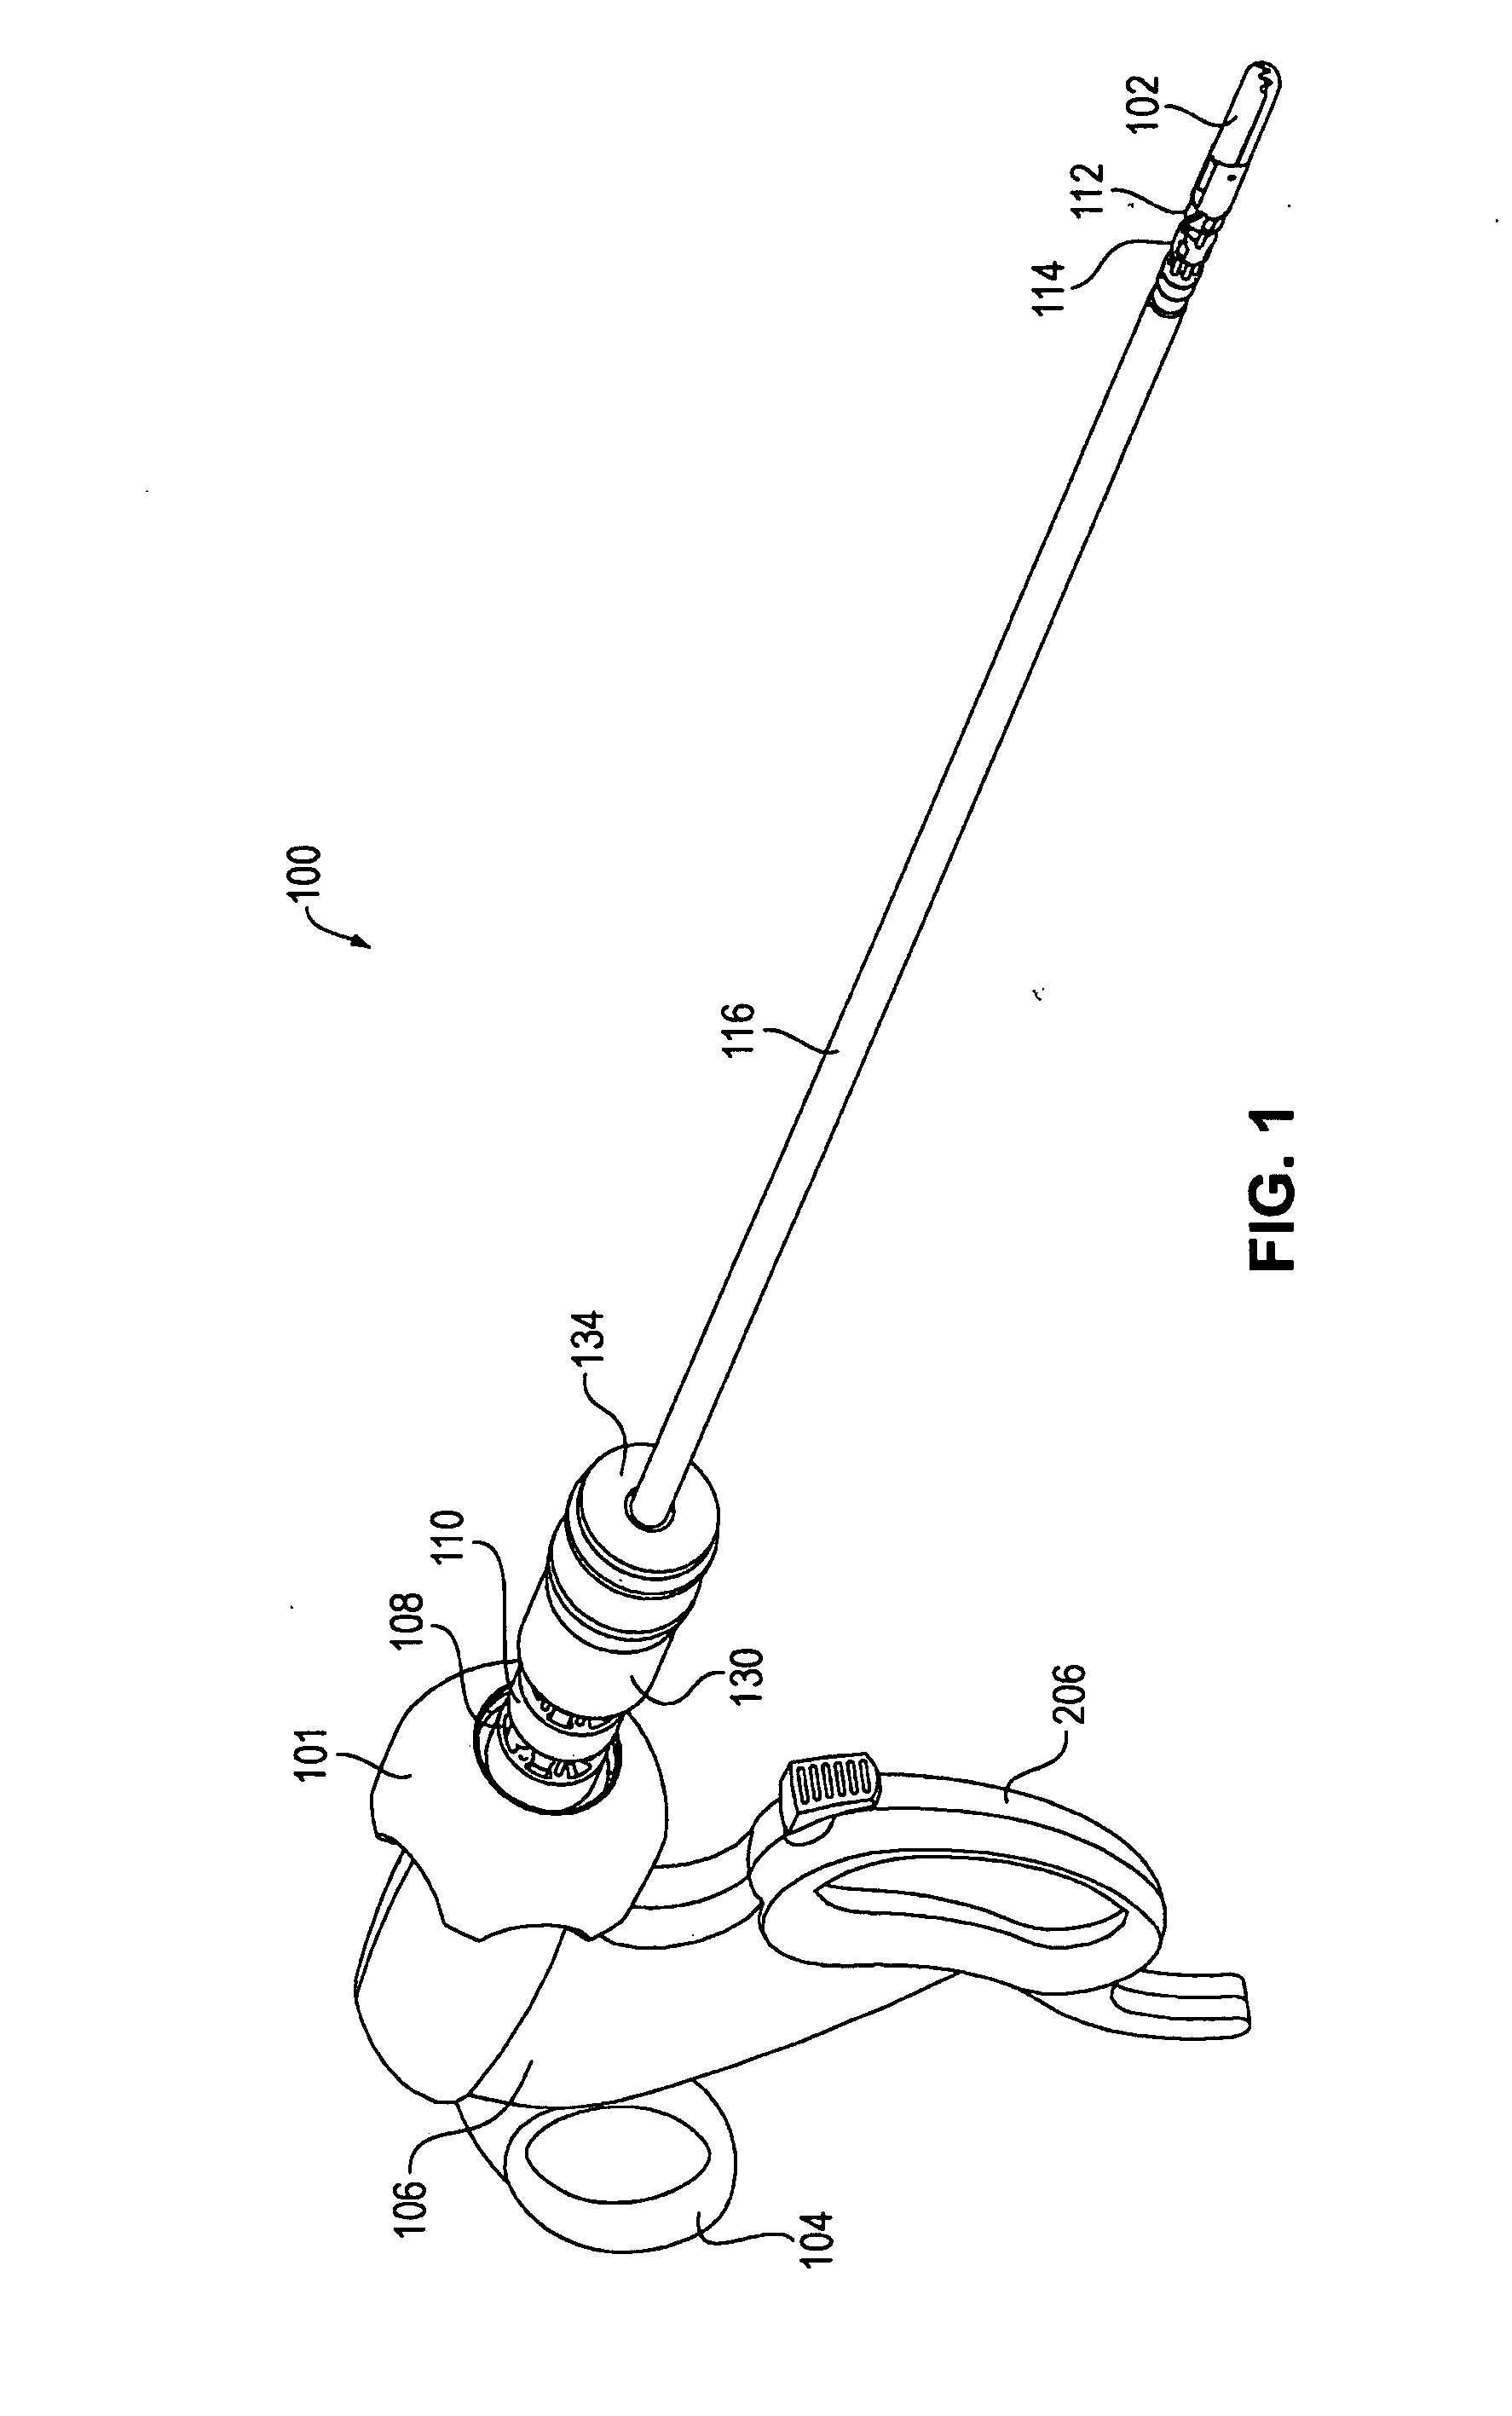 Tool with end effector force limiter